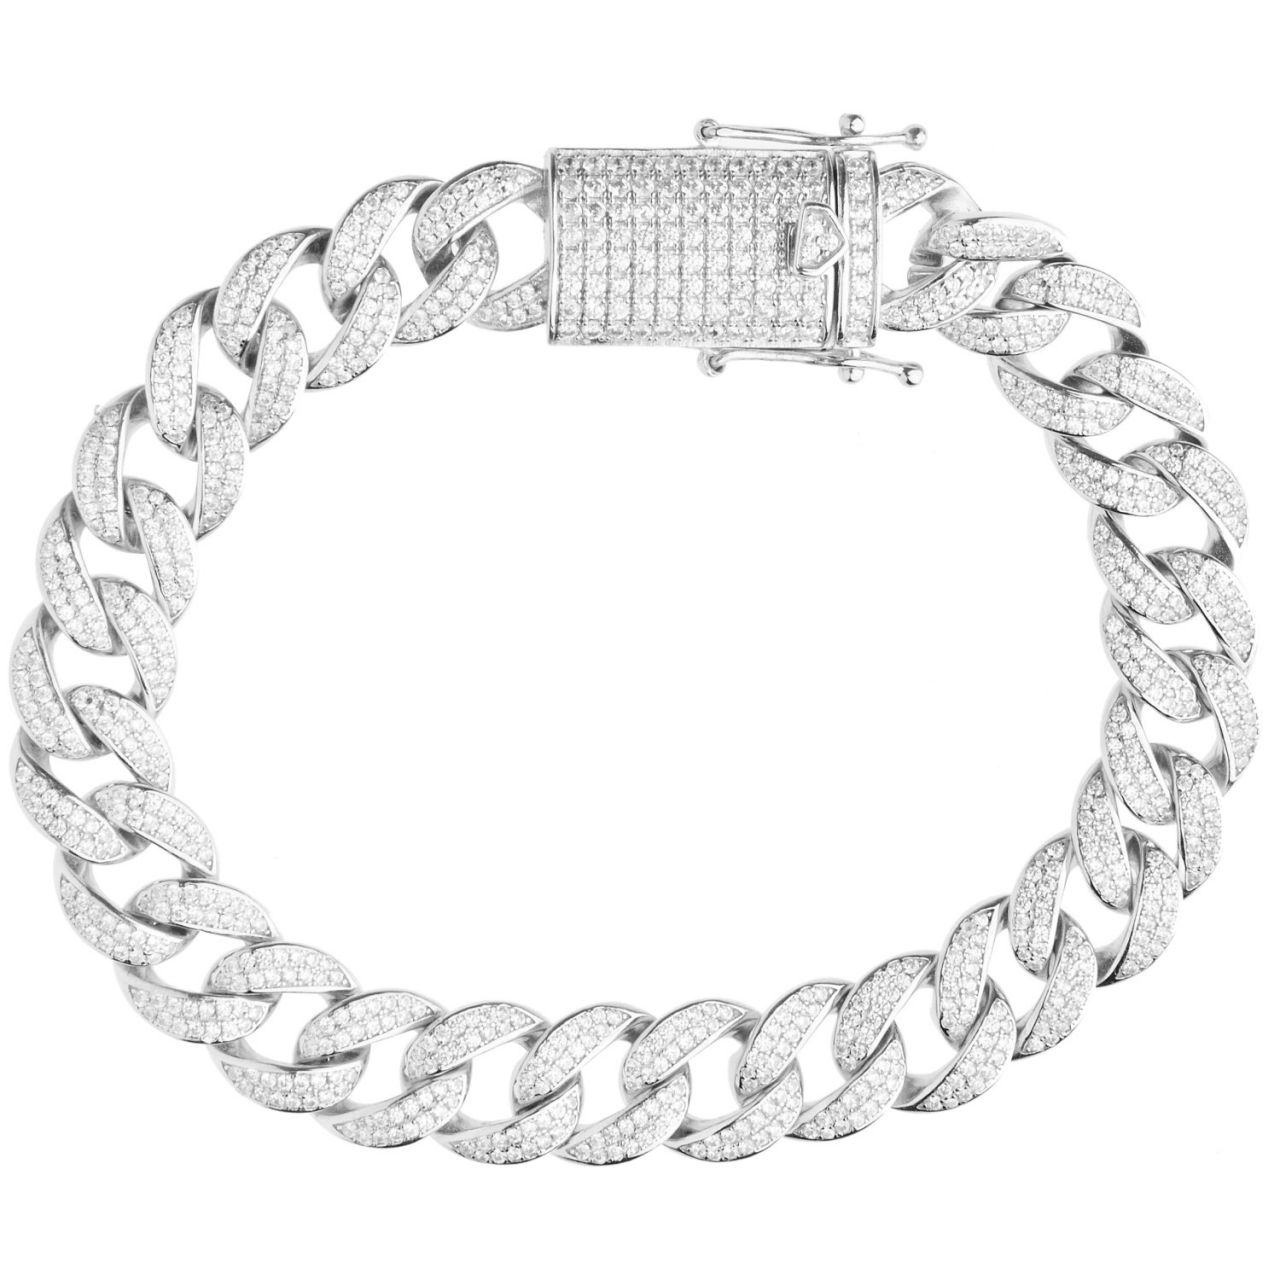 Premium Bling 925 Sterling Silber Armband – MIAMI CURB 12mm